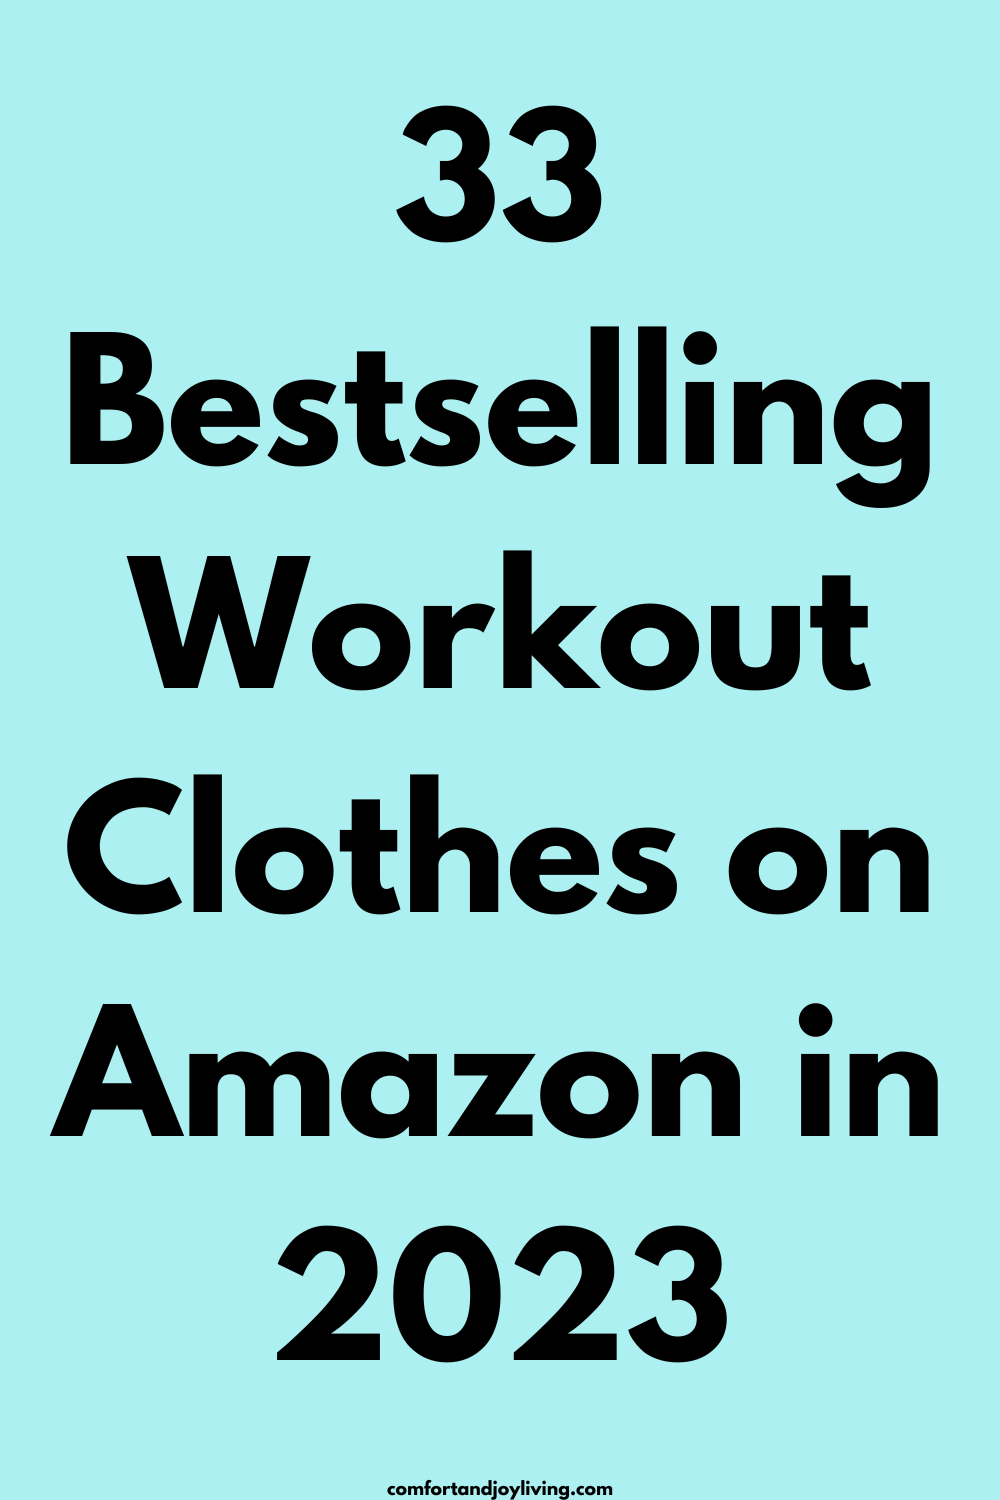 33 Bestselling Workout Clothes on Amazon in 2023 